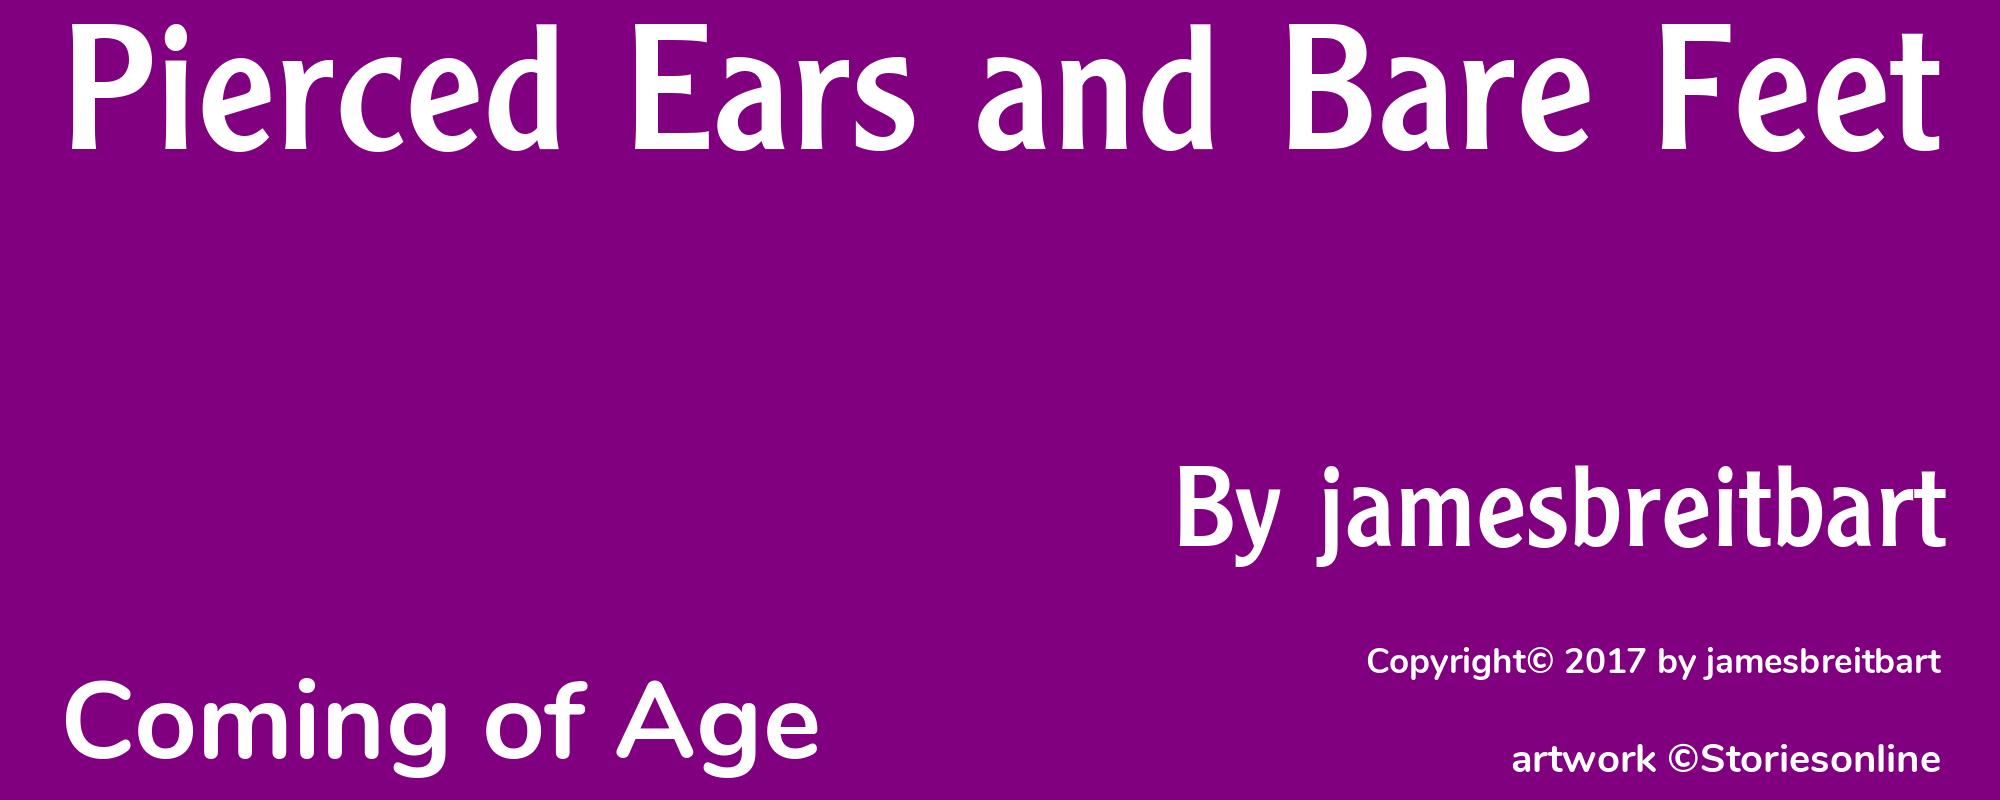 Pierced Ears and Bare Feet - Cover